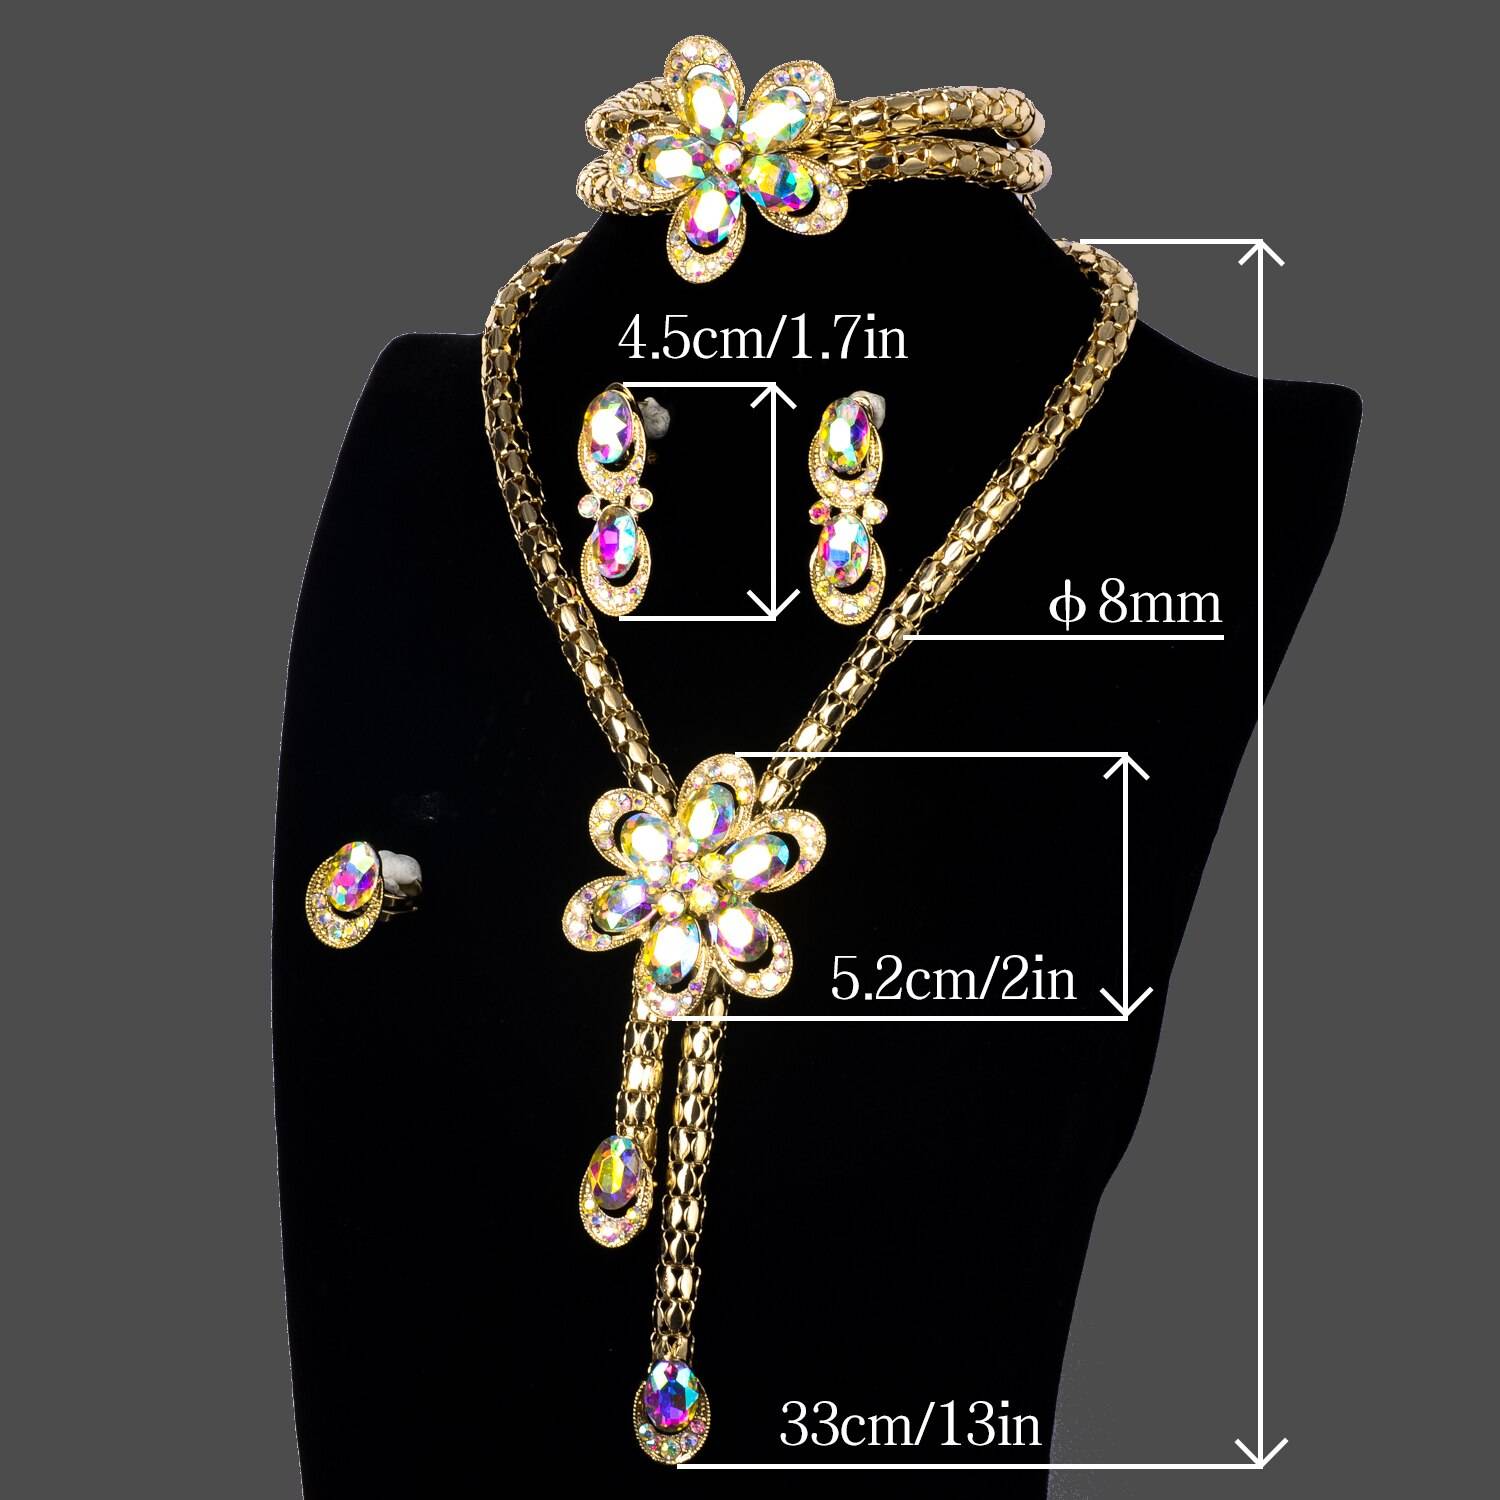 Sunny Jewelry Sets Hot Sale Bridal Wedding Flower Zircon Earrings Necklace Bracelet Ring For Women Romantic Trendy Gift Party Wedding Jewellery Set 8d255f28538fbae46aeae7: Jewelry Sets